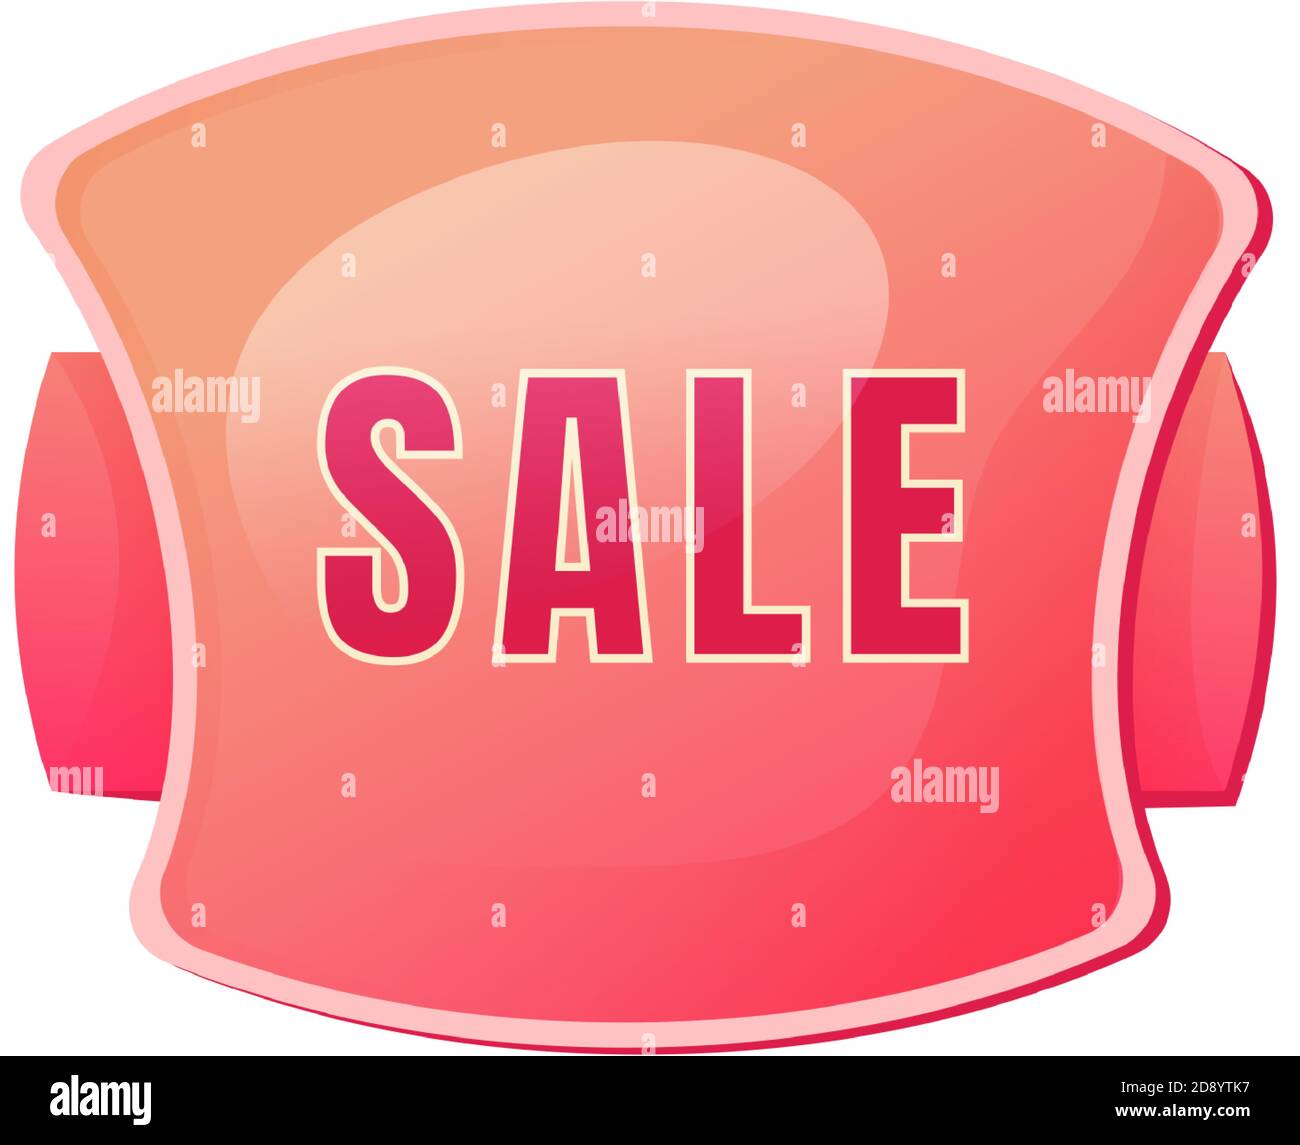 Clearance sale Cut Out Stock Images & Pictures - Alamy